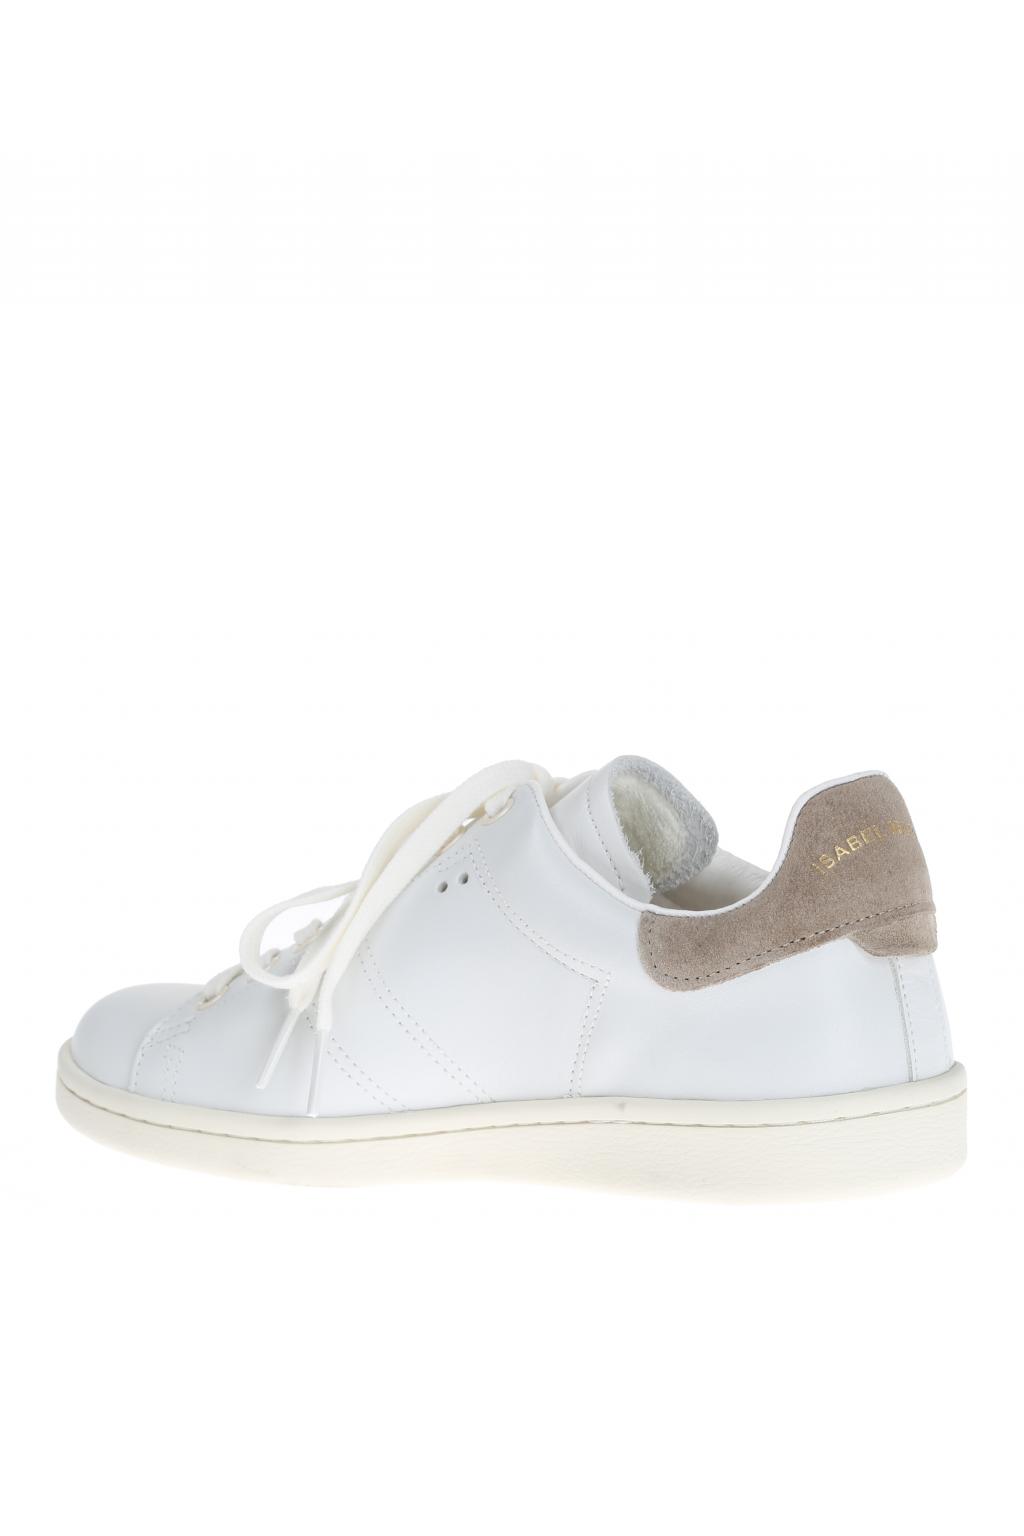 India Meerdere Of Marant Etoile Leather 'Bart' Sneakers | Women's Shoes | Vitkac